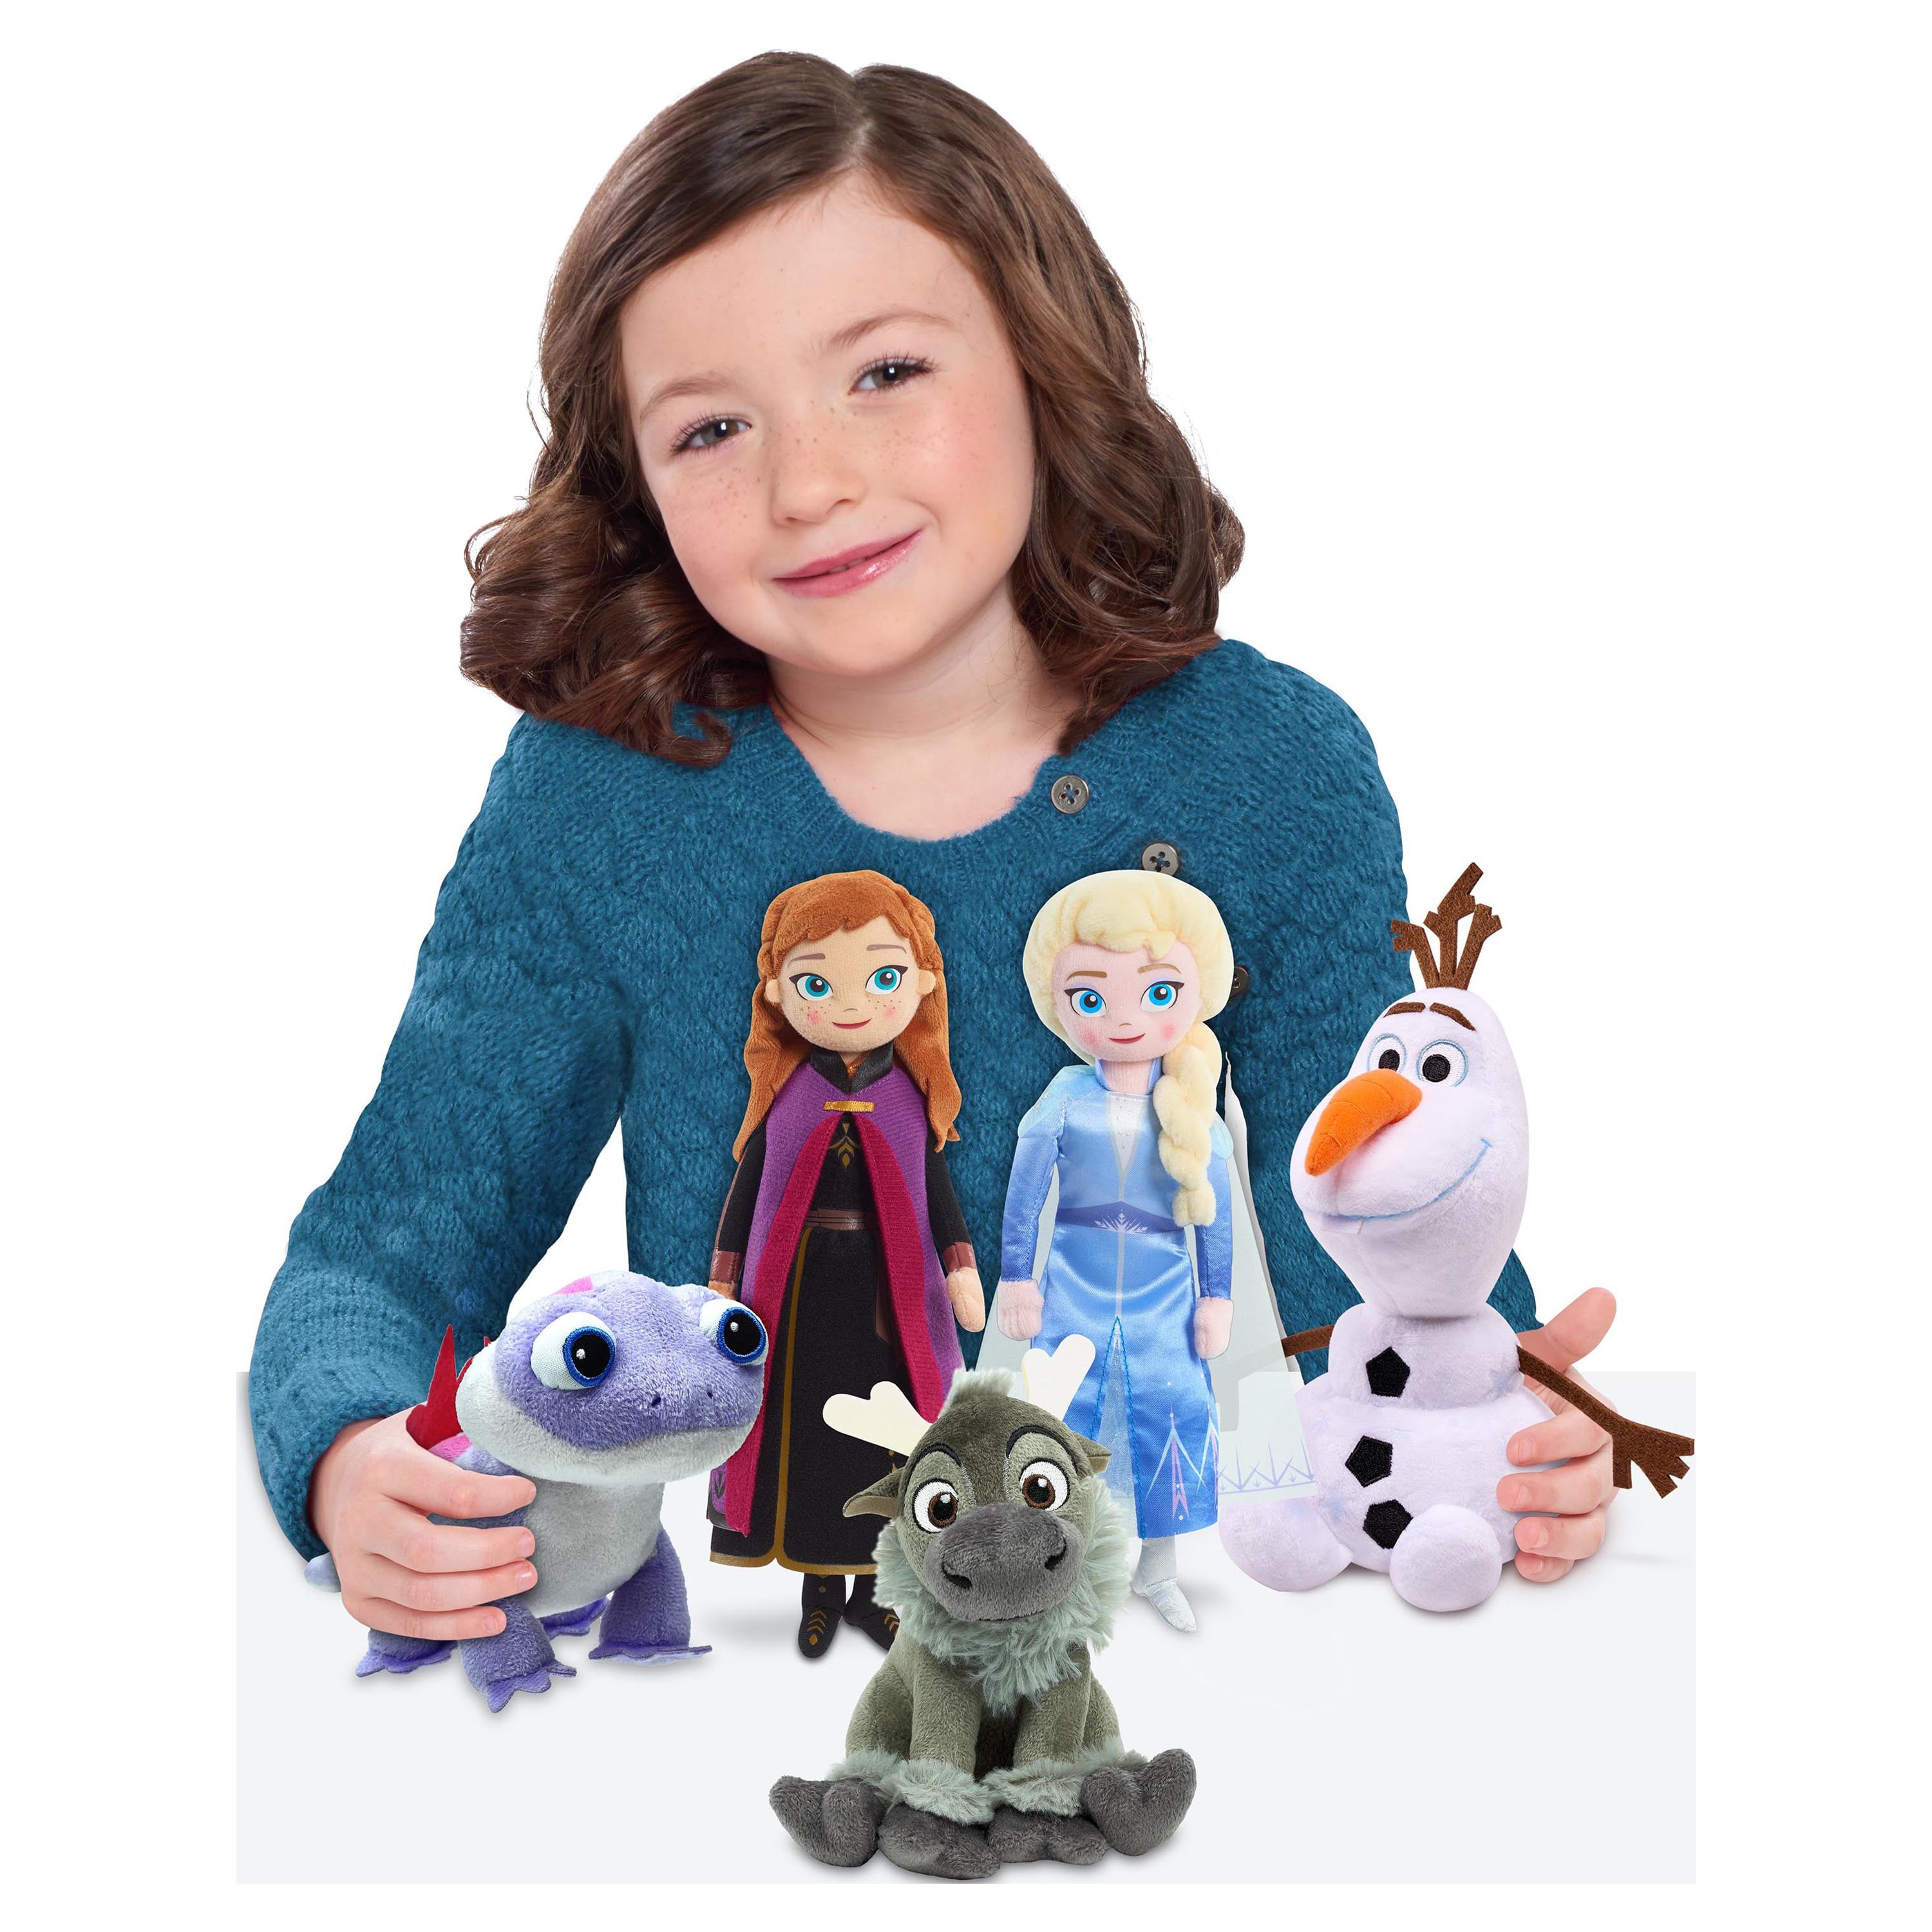 Disney’s Frozen 2 Plush Collector Set, 5-pieces, Officially Licensed Kids Toys for Ages 3 Up, Gifts and Presents - image 2 of 3